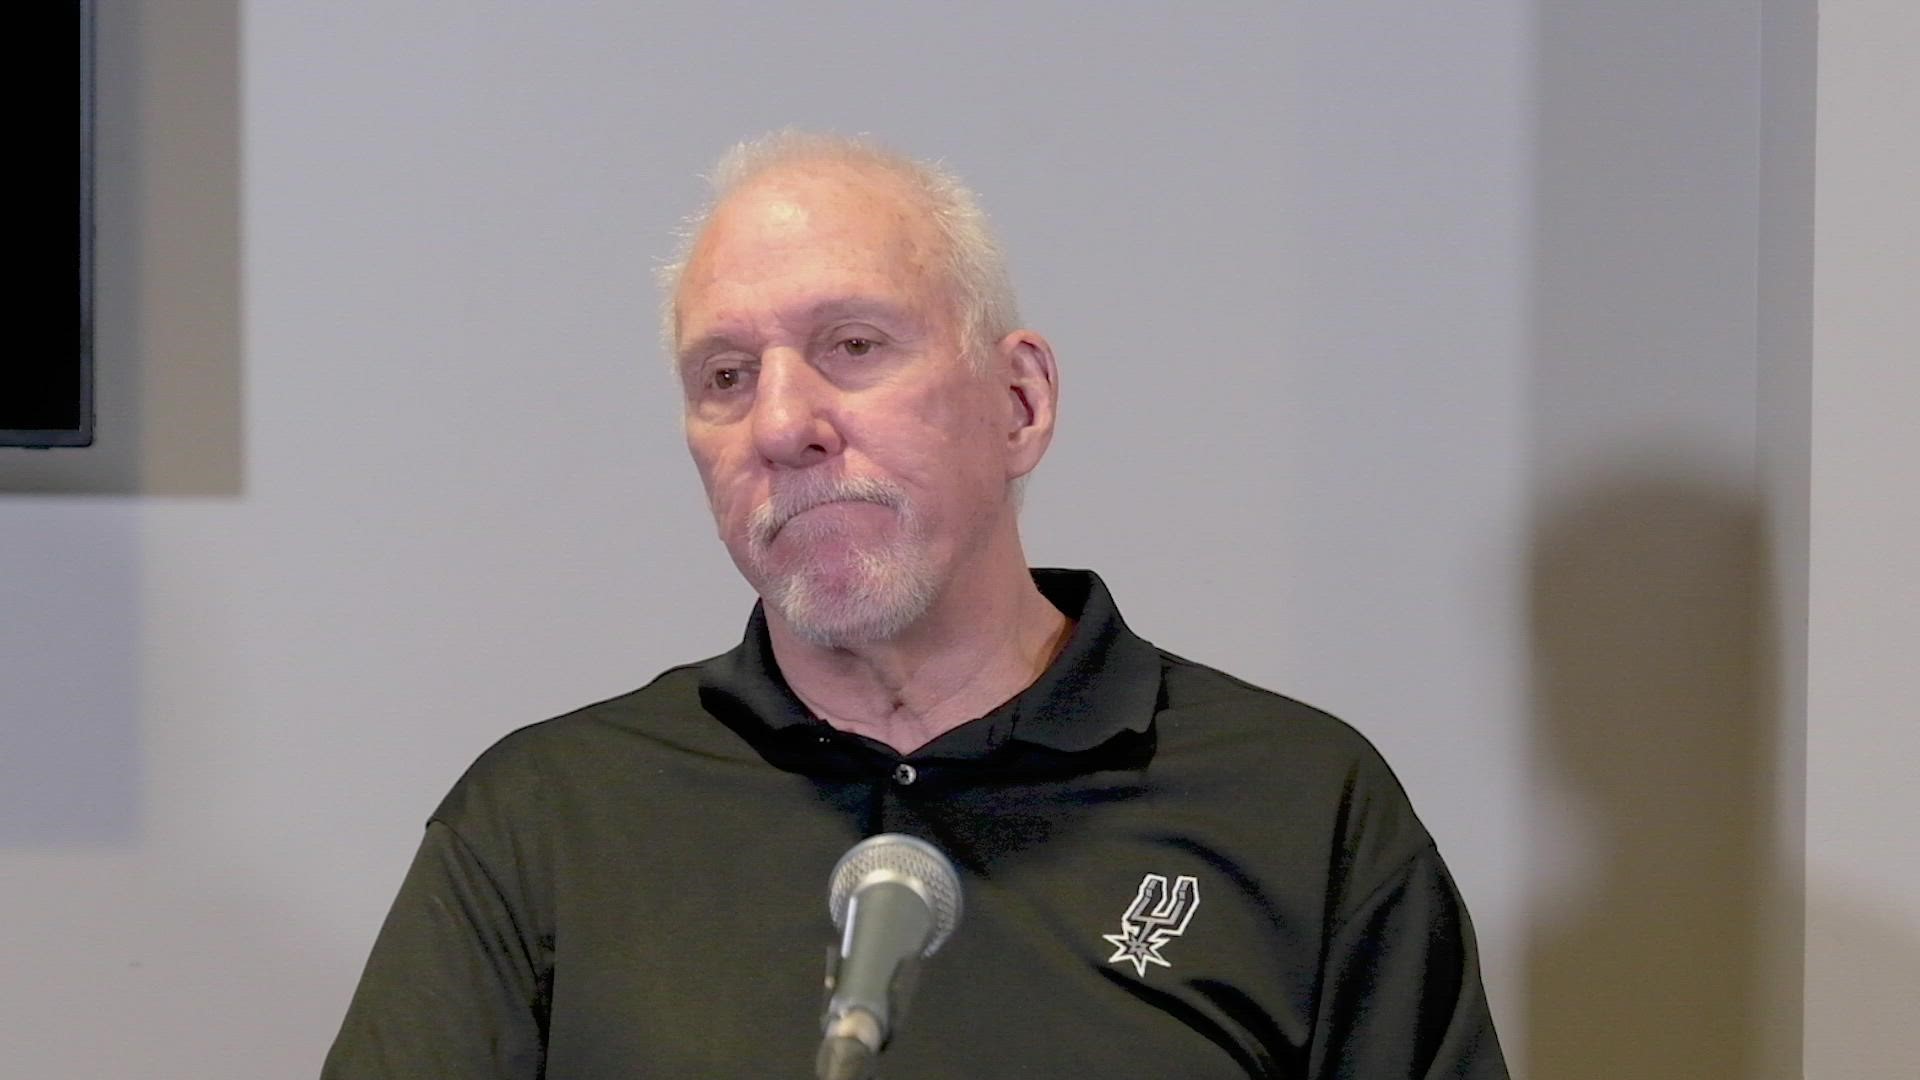 "For whatever reason we weren't prepared enough mentally," Popovich lamented after the loss.